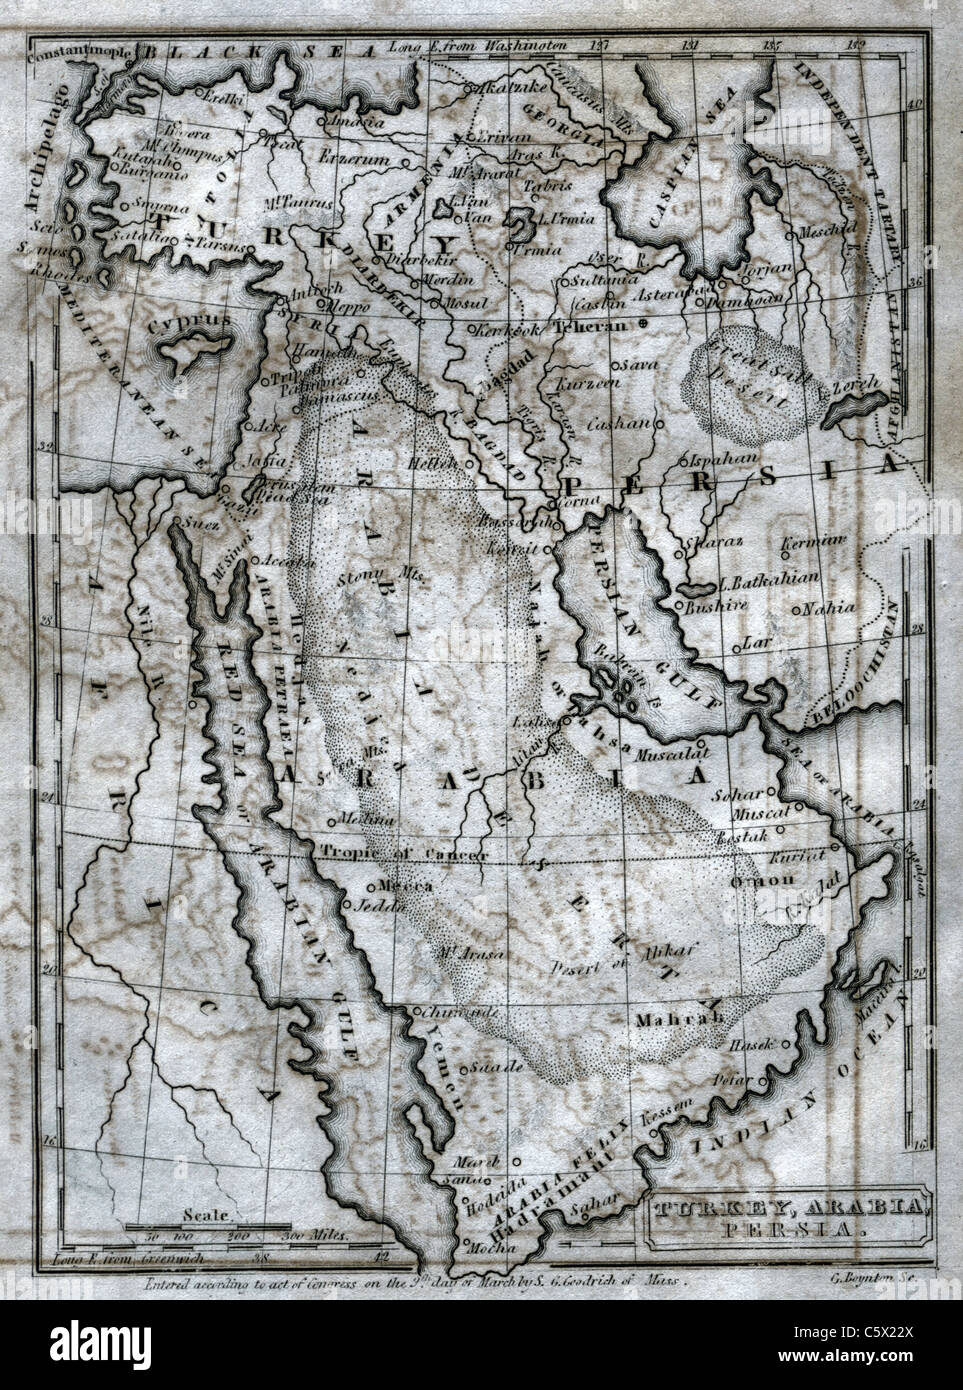 Turkey, Arabia, Persia - Antiquarian Black and White Map from 'The Second Book of History' Stock Photo